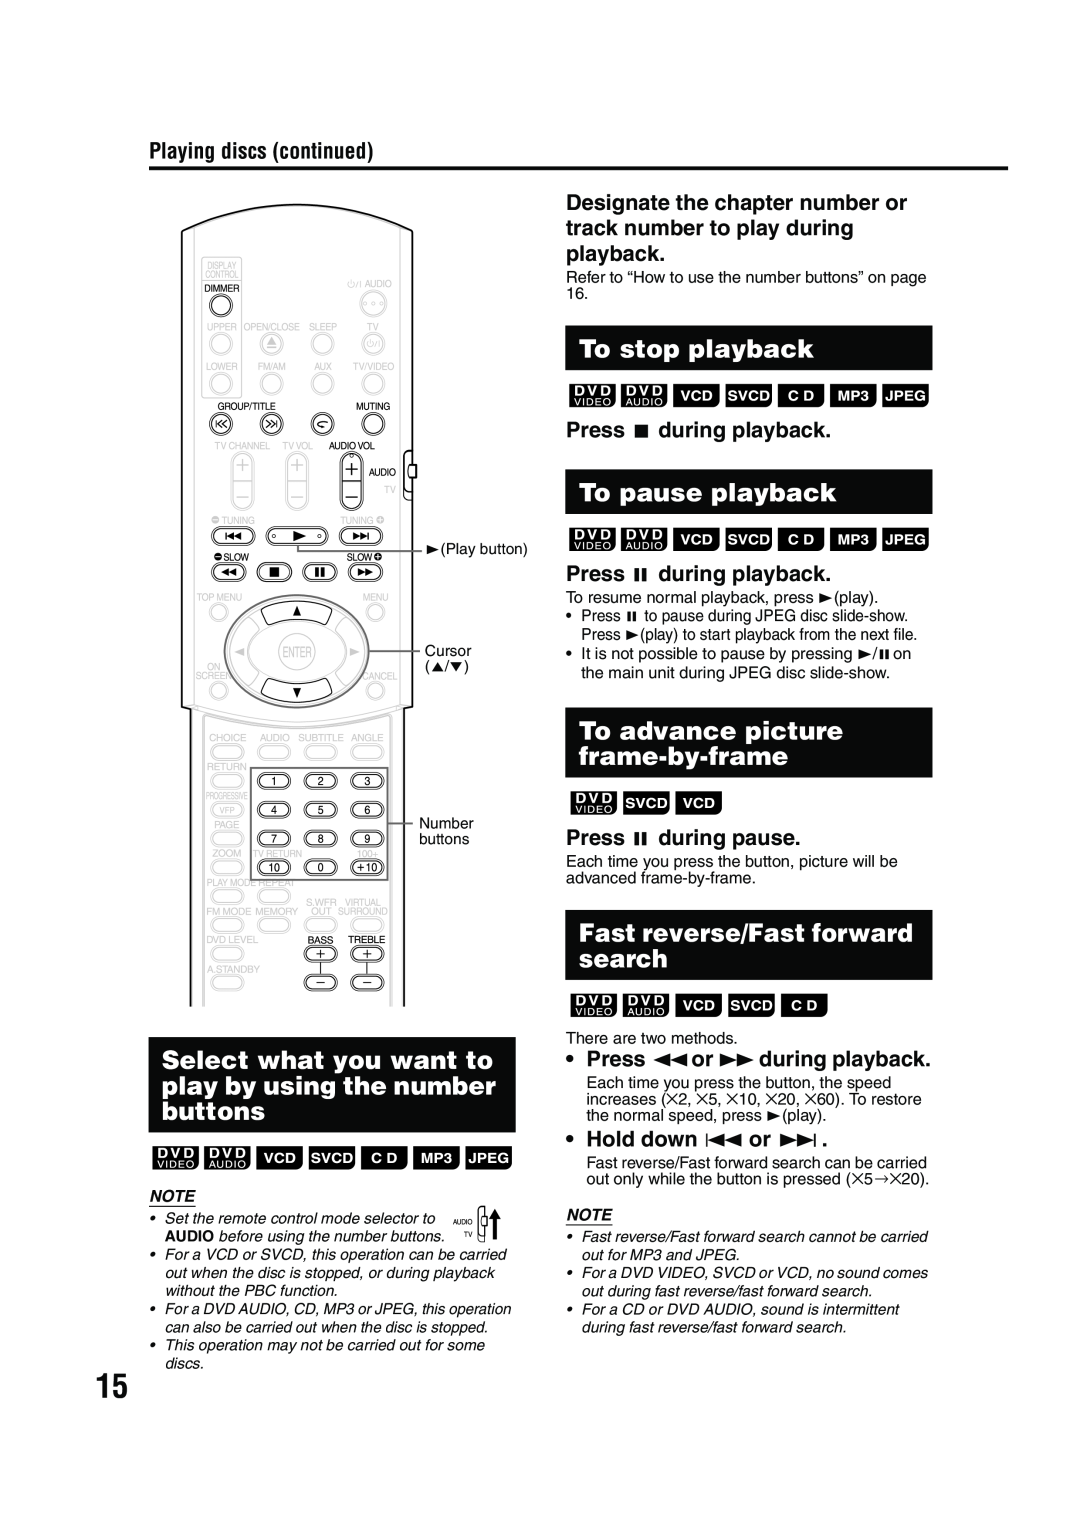 JVC EX-A1 manual To stop playback, To pause playback, To advance picture frame-by-frame, Fast reverse/Fast forward search 